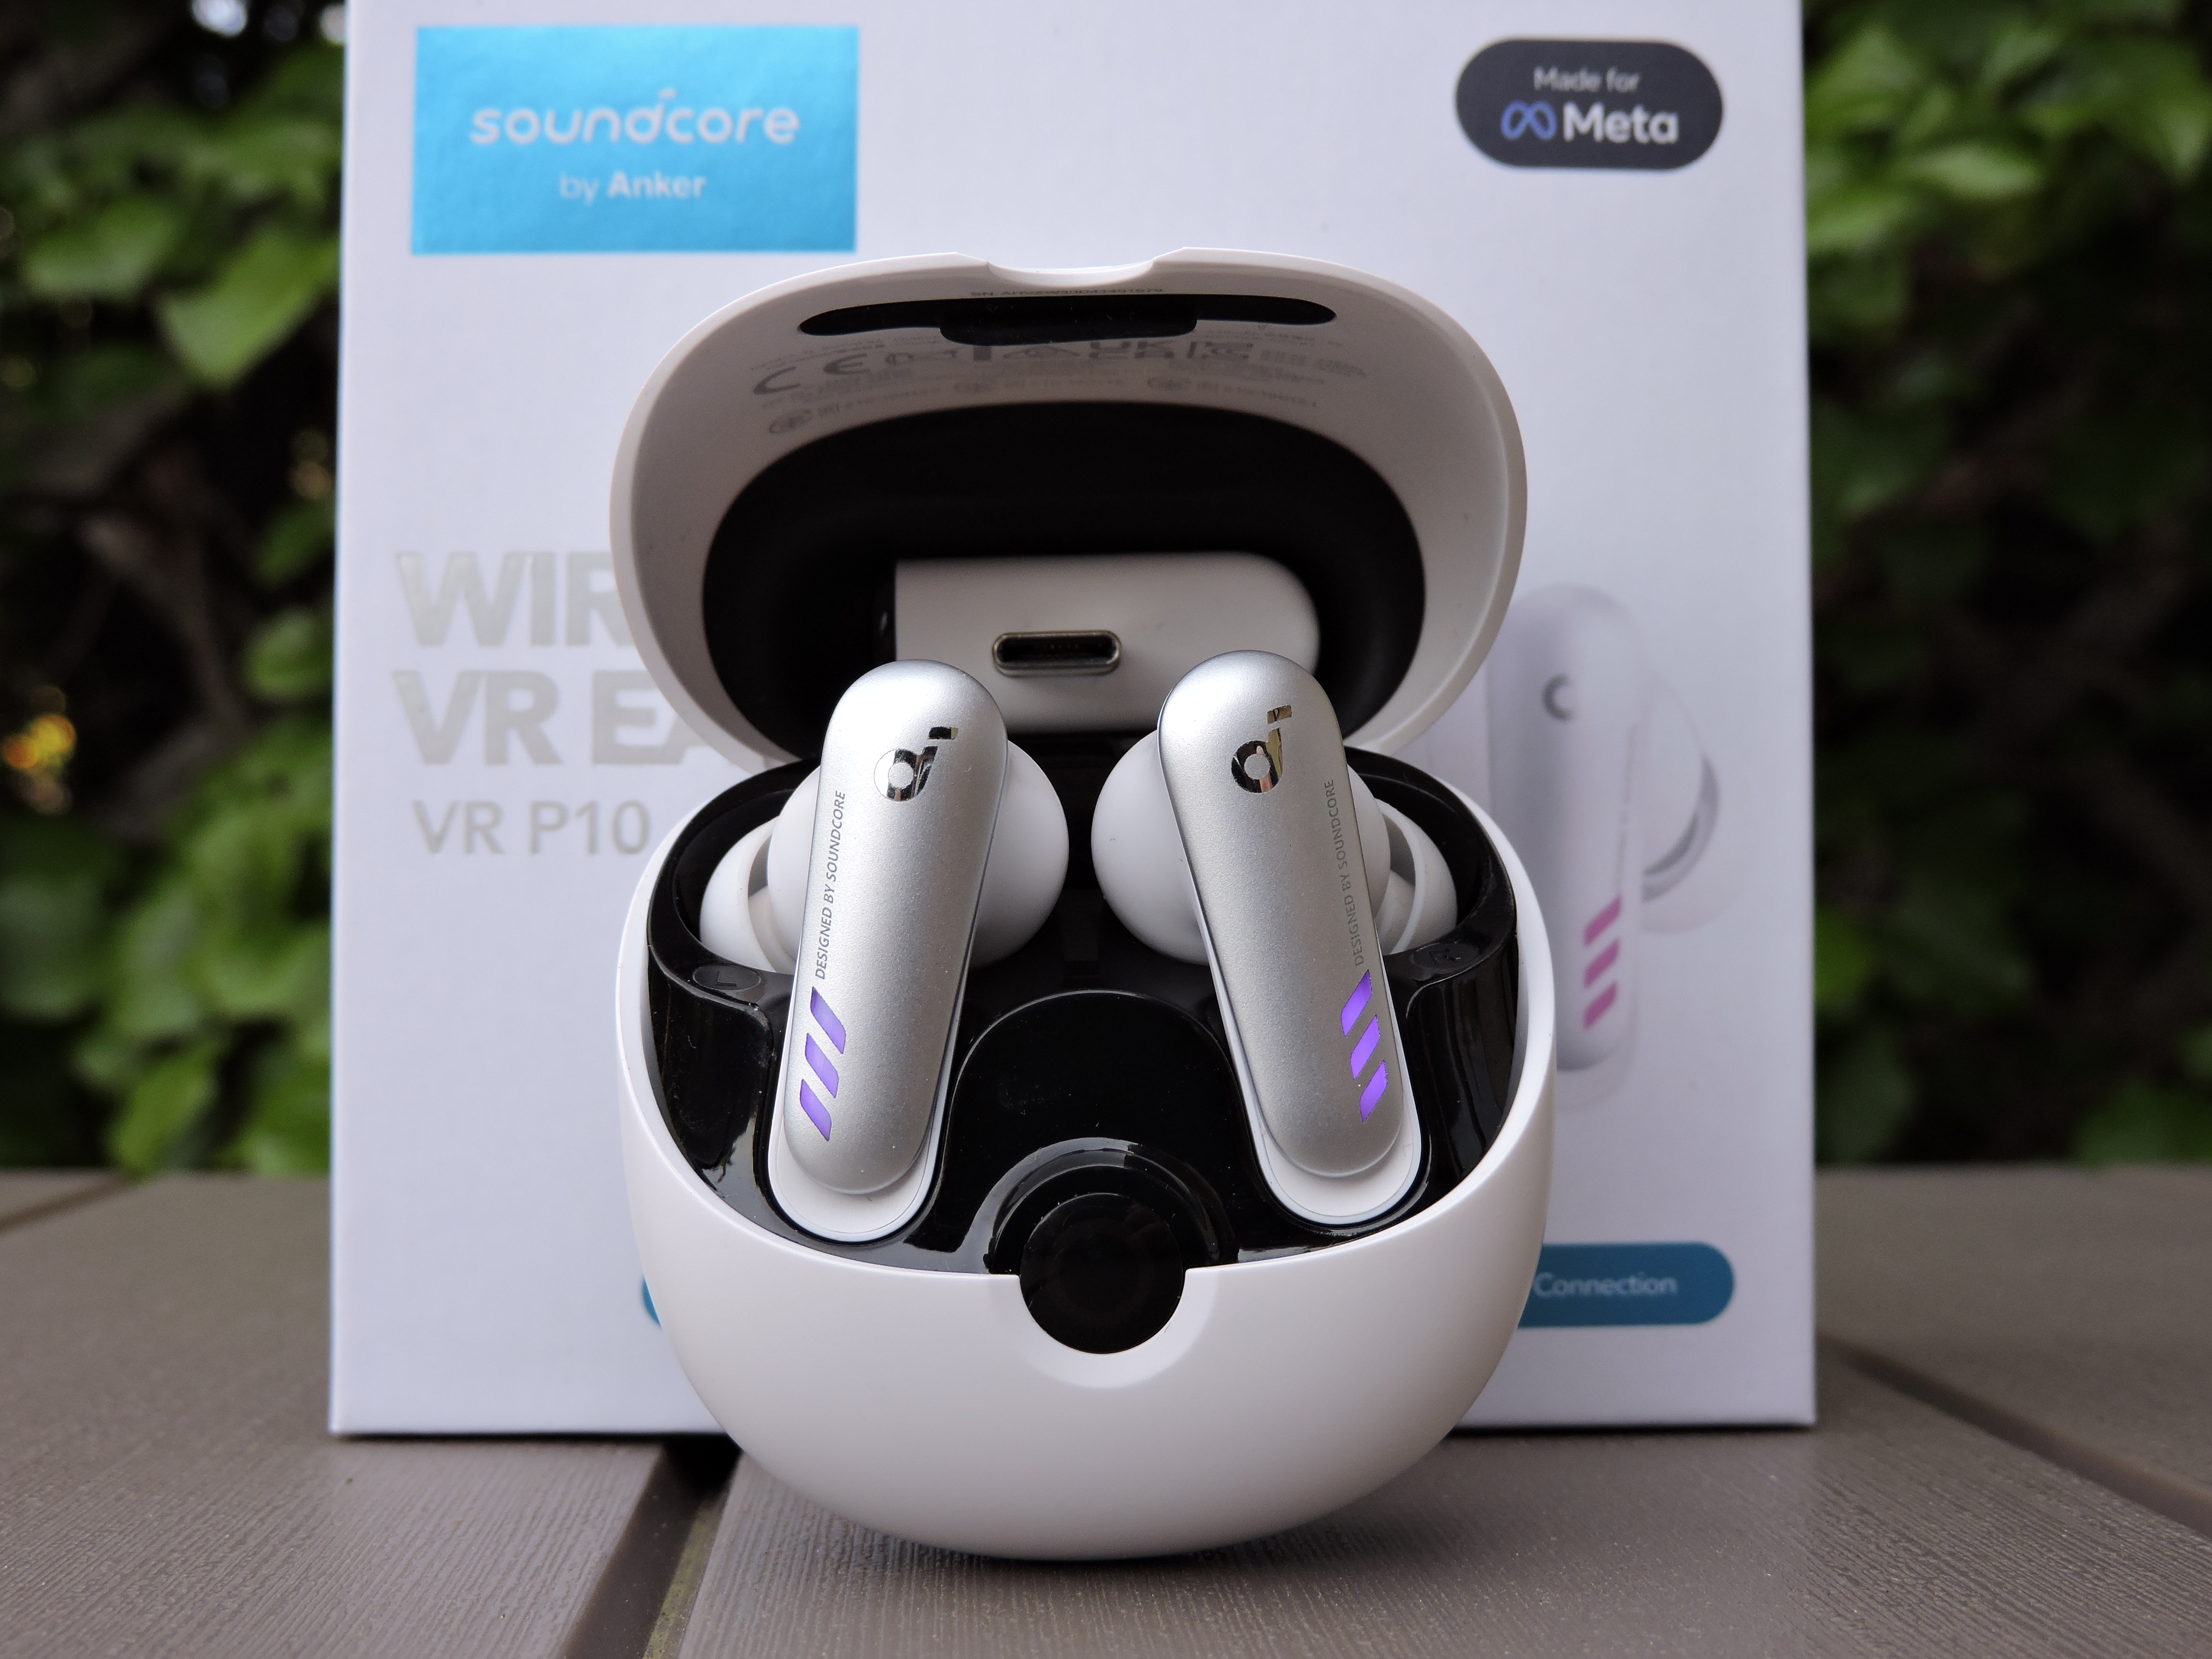 Soundcore VR P10 review.  I dreamed about such headphones!